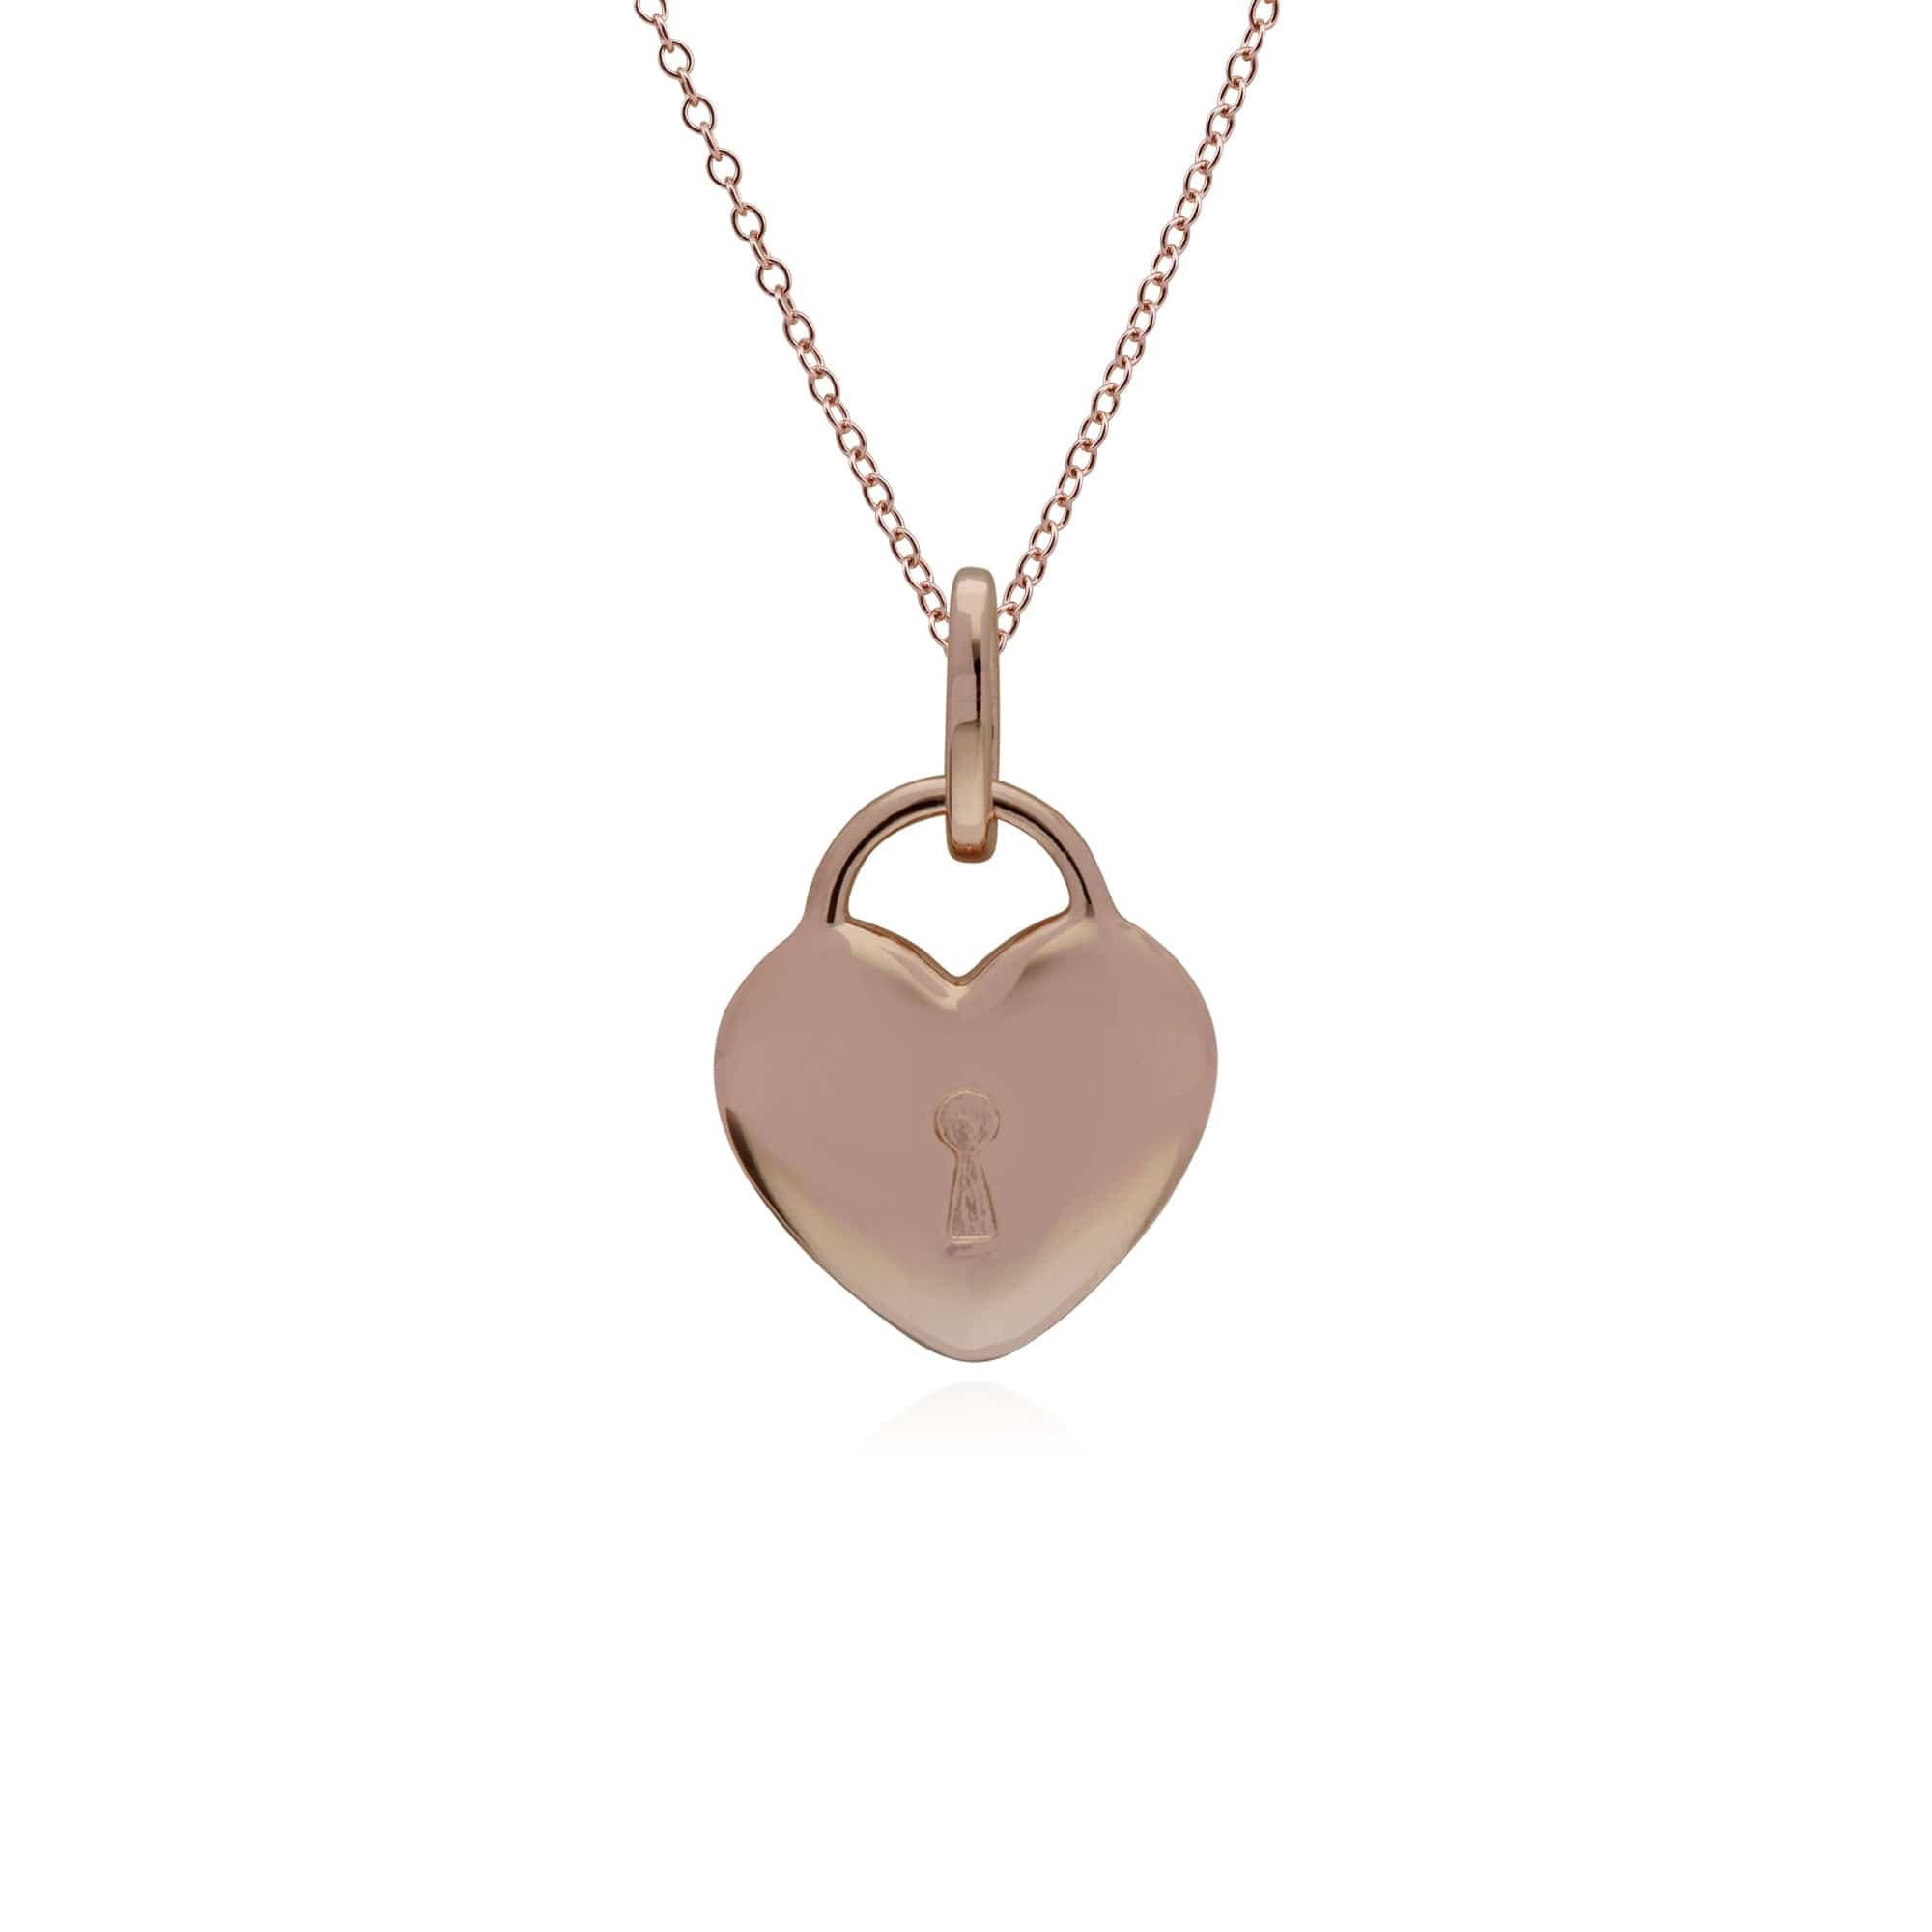 270P027302925-270P026901925 Classic Heart Lock Pendant & Emerald Charm in Rose Gold Plated 925 Sterling Silver 3